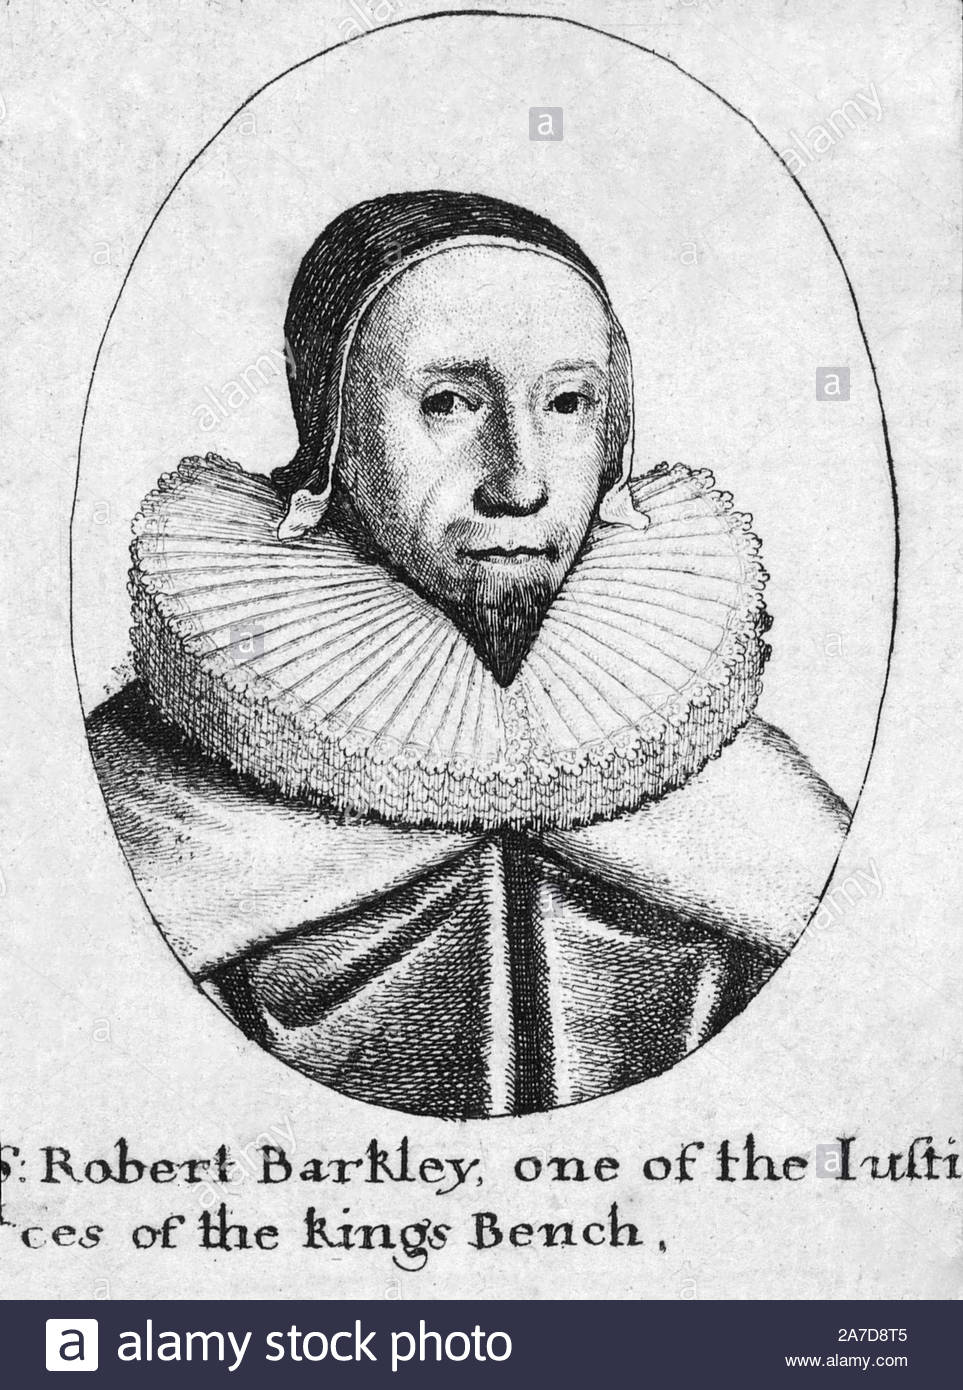 Sir Robert Berkeley portrait, 1584 – 1656, was an English judge and politician, etching by Bohemian etcher Wenceslaus Hollar from 1600s Stock Photo